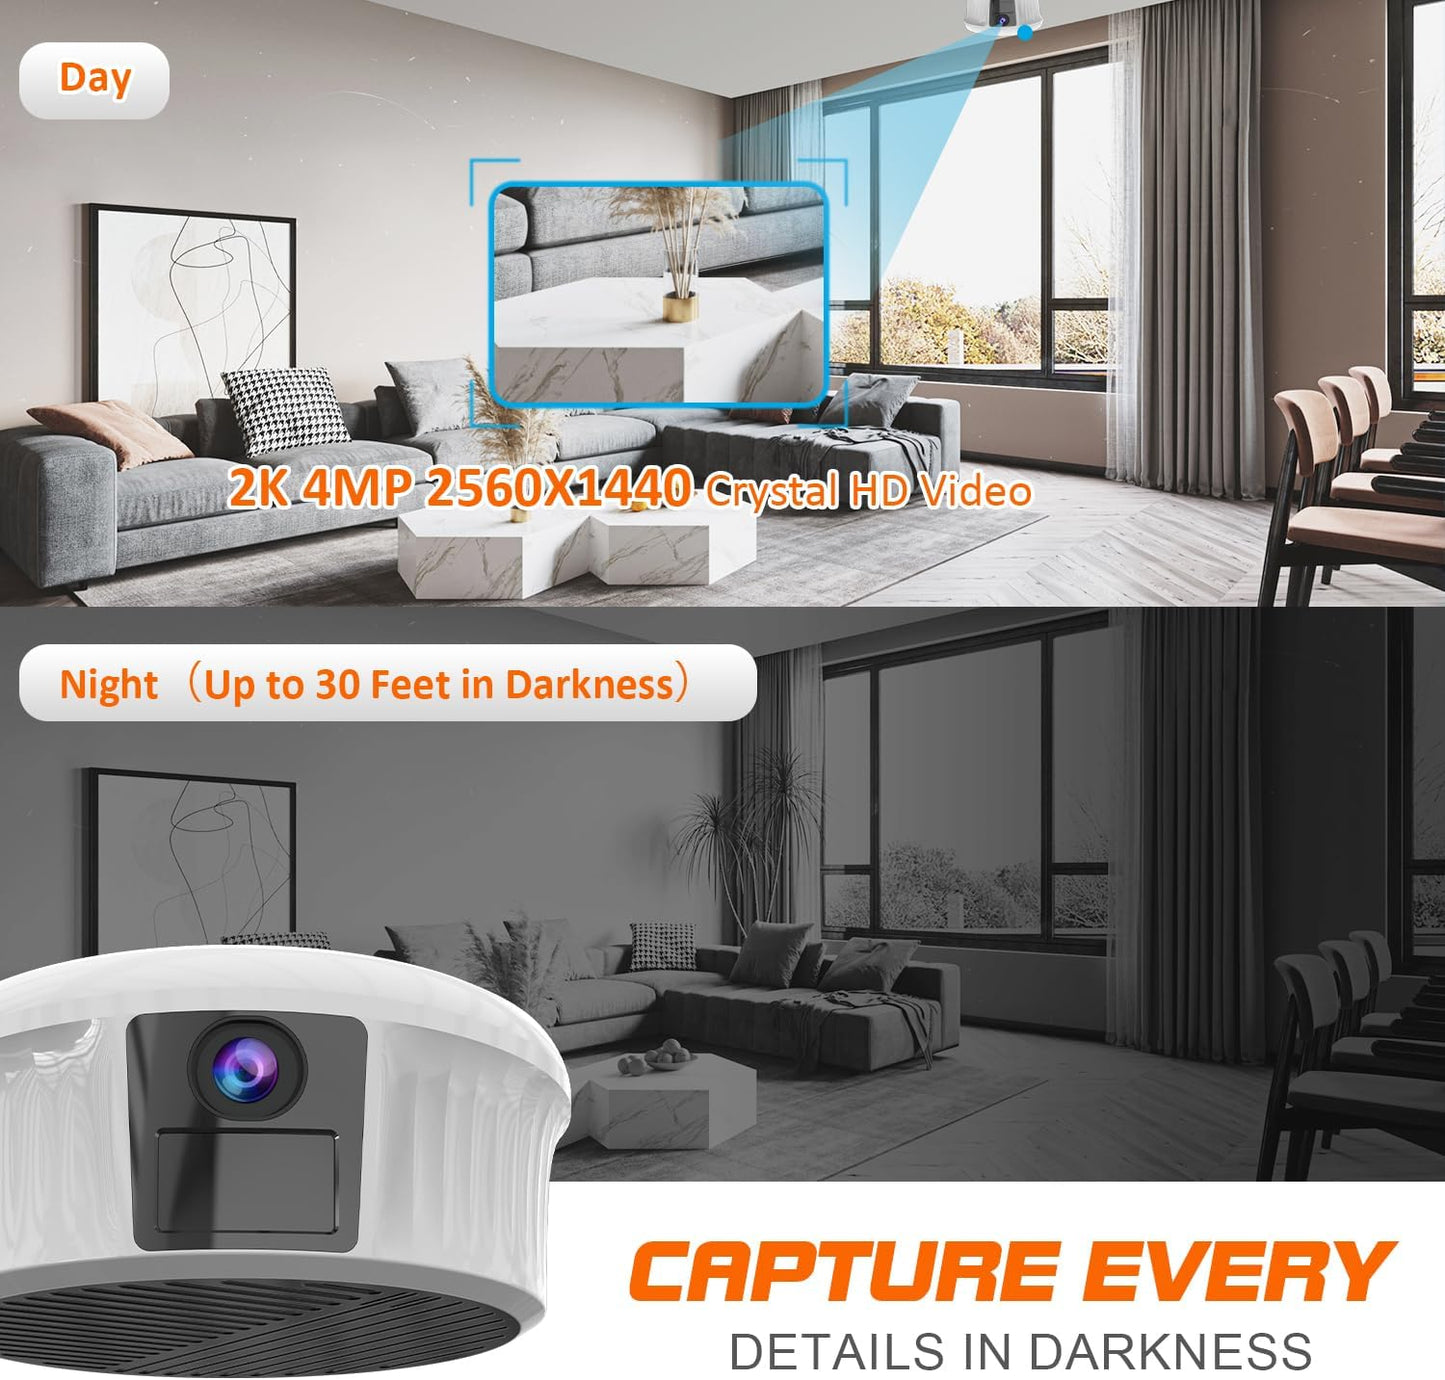 2K Nanny Cam - Invisible Camera for Home Security with DIY Cover, Night Vision Motion Detection - 10000mAH Rechargeable